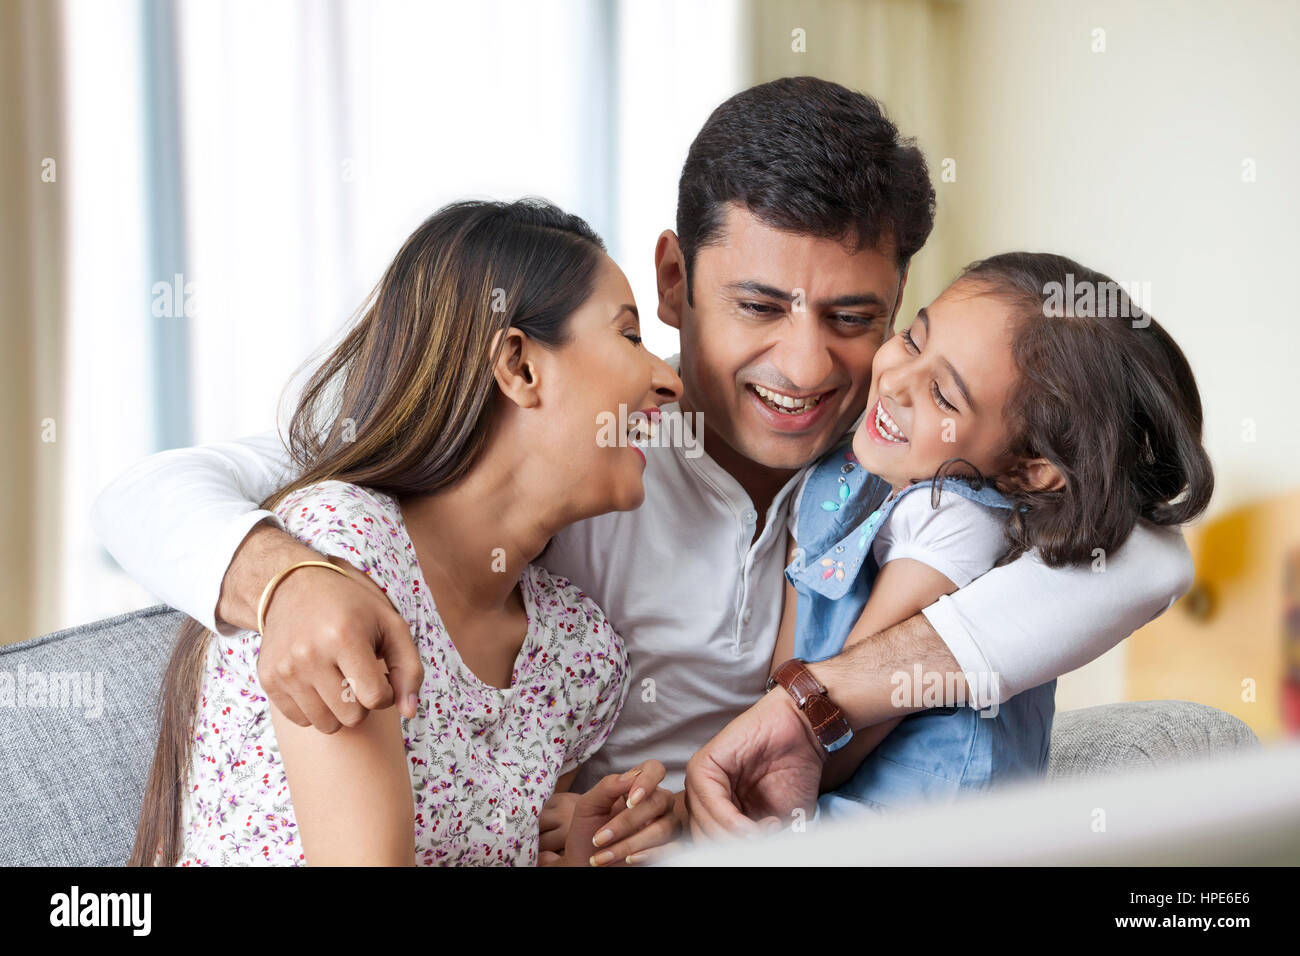 Playful family of three sitting on sofa at home Stock Photo